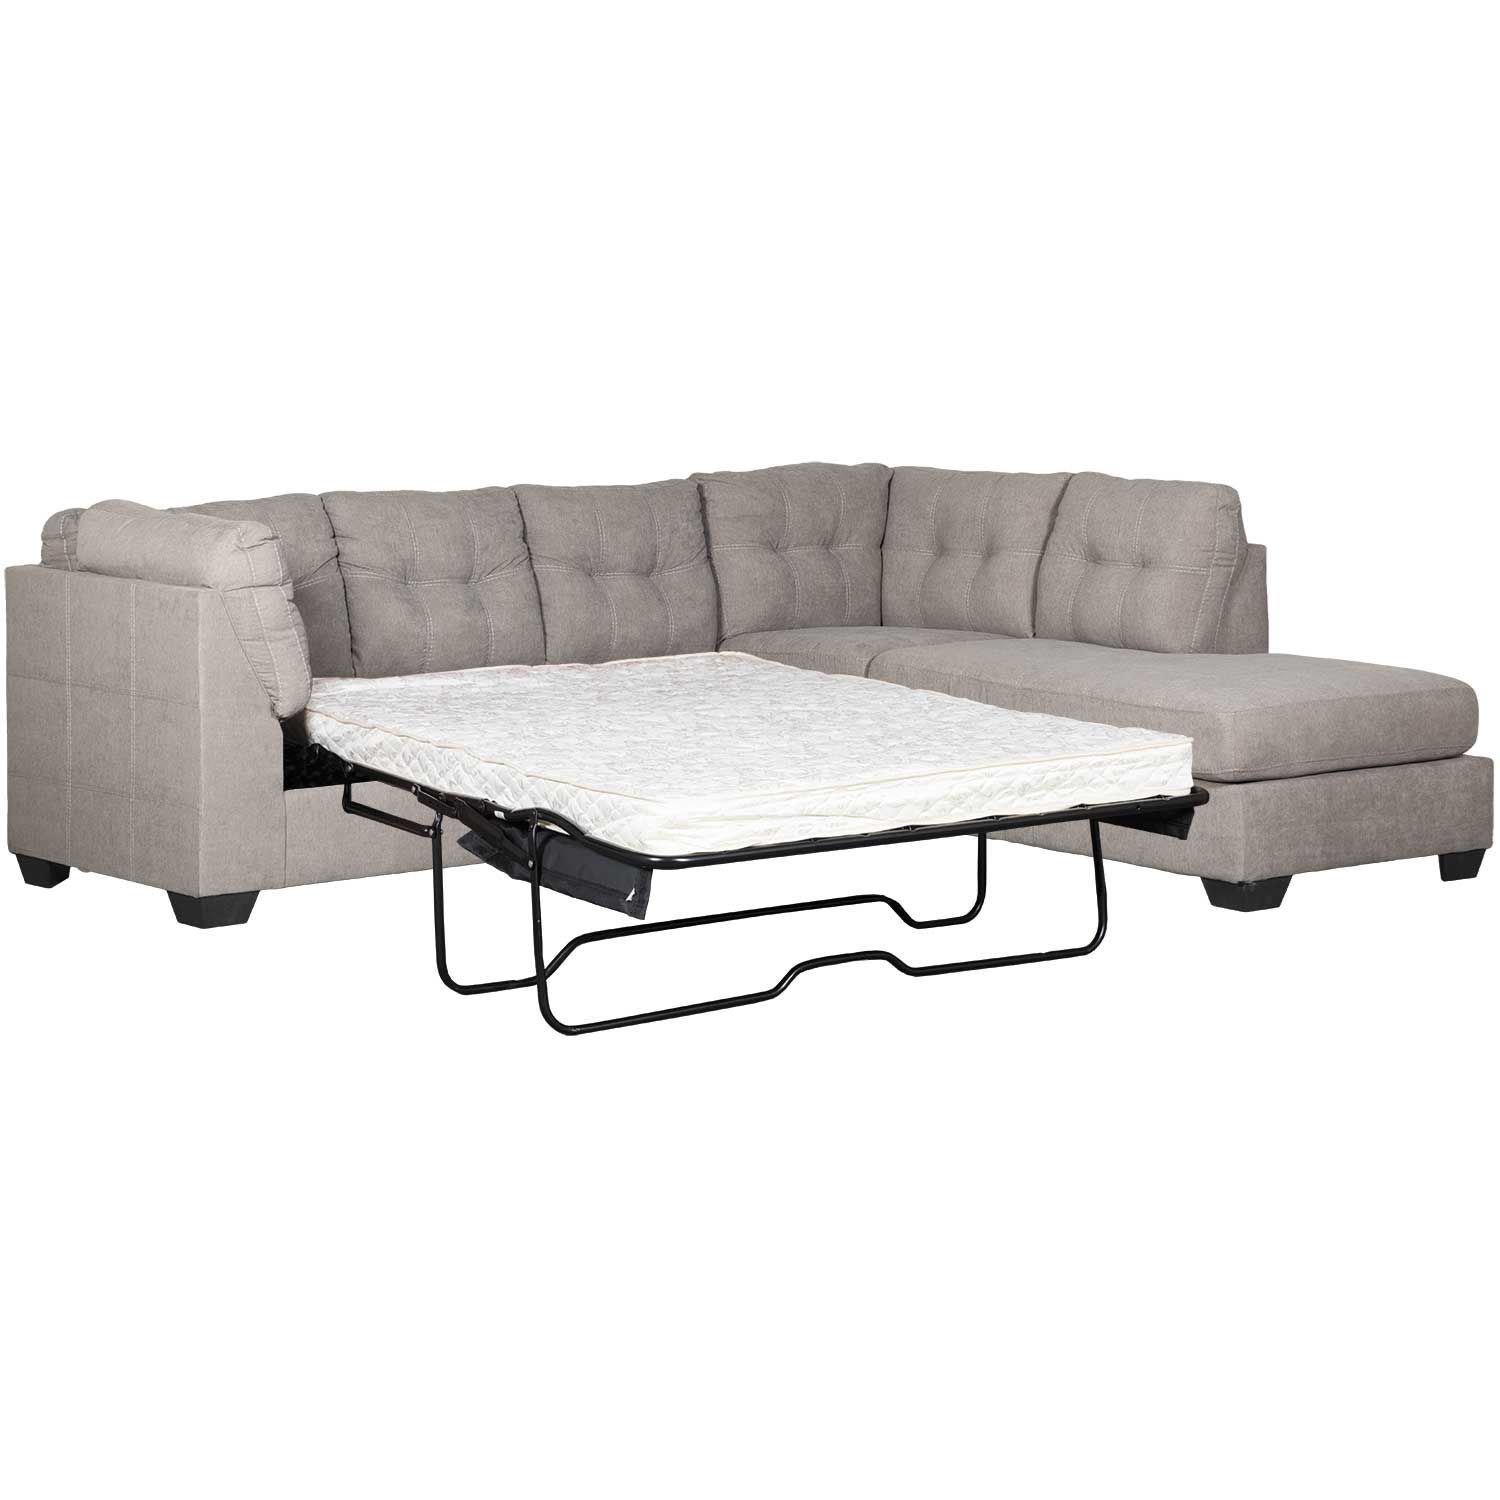 Picture of Maier Charcoal 2 Piece Sleeper Sectional with RAF Chaise